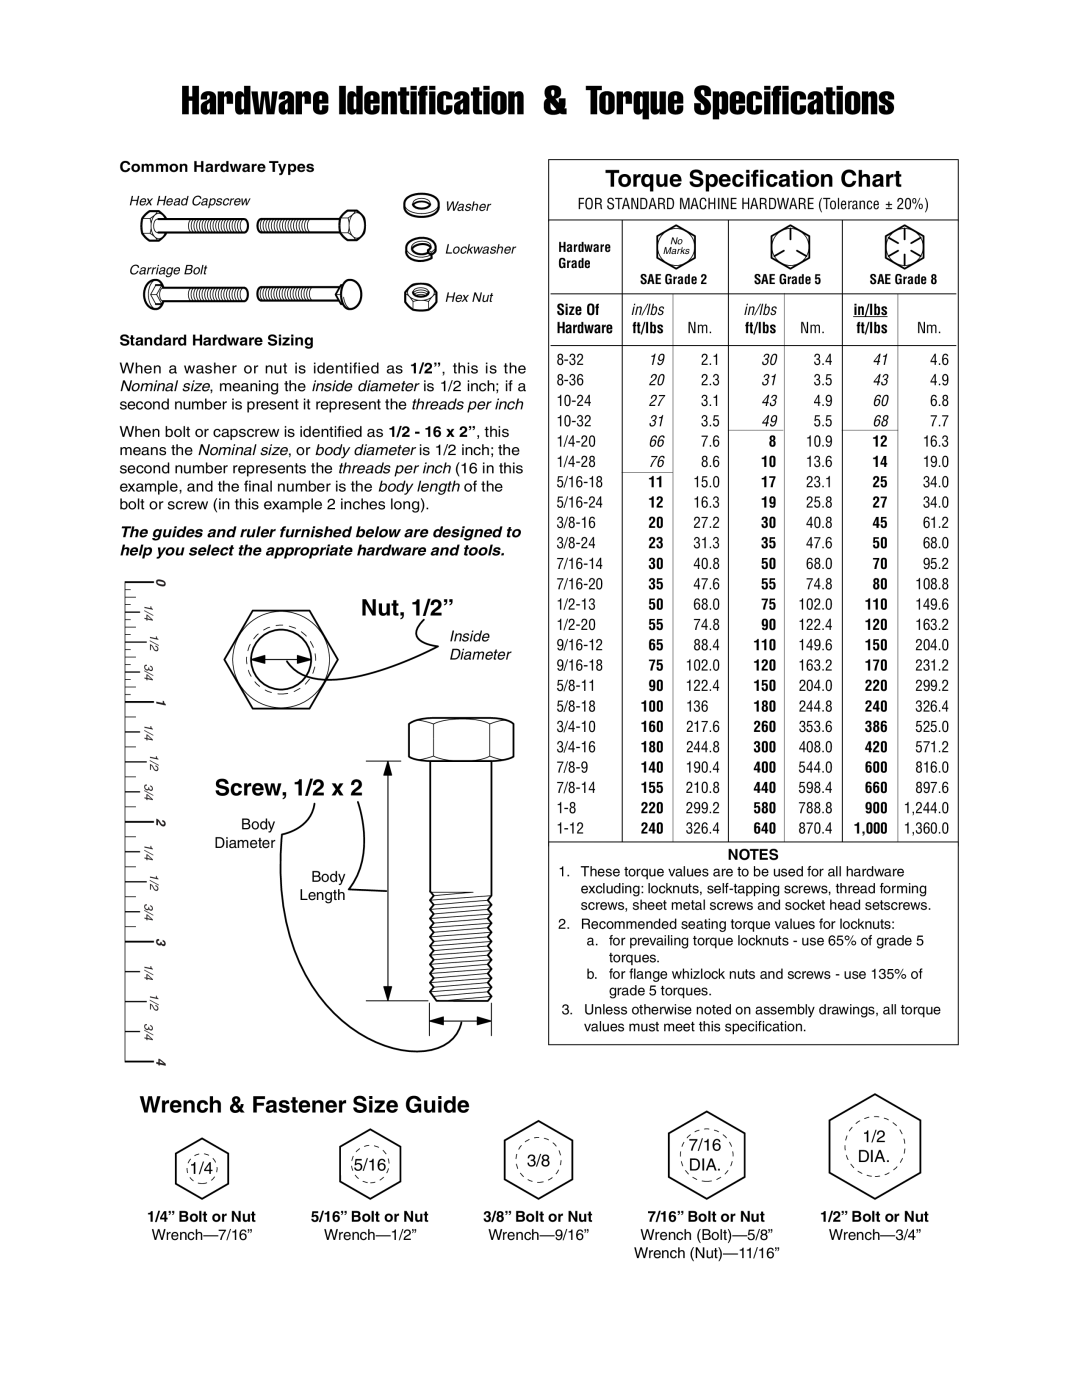 Simplicity 5/14 Series Wrench & Fastener Size Guide, Hardware Identification & Torque Specifications, Nut, 1/2”, 7/16 